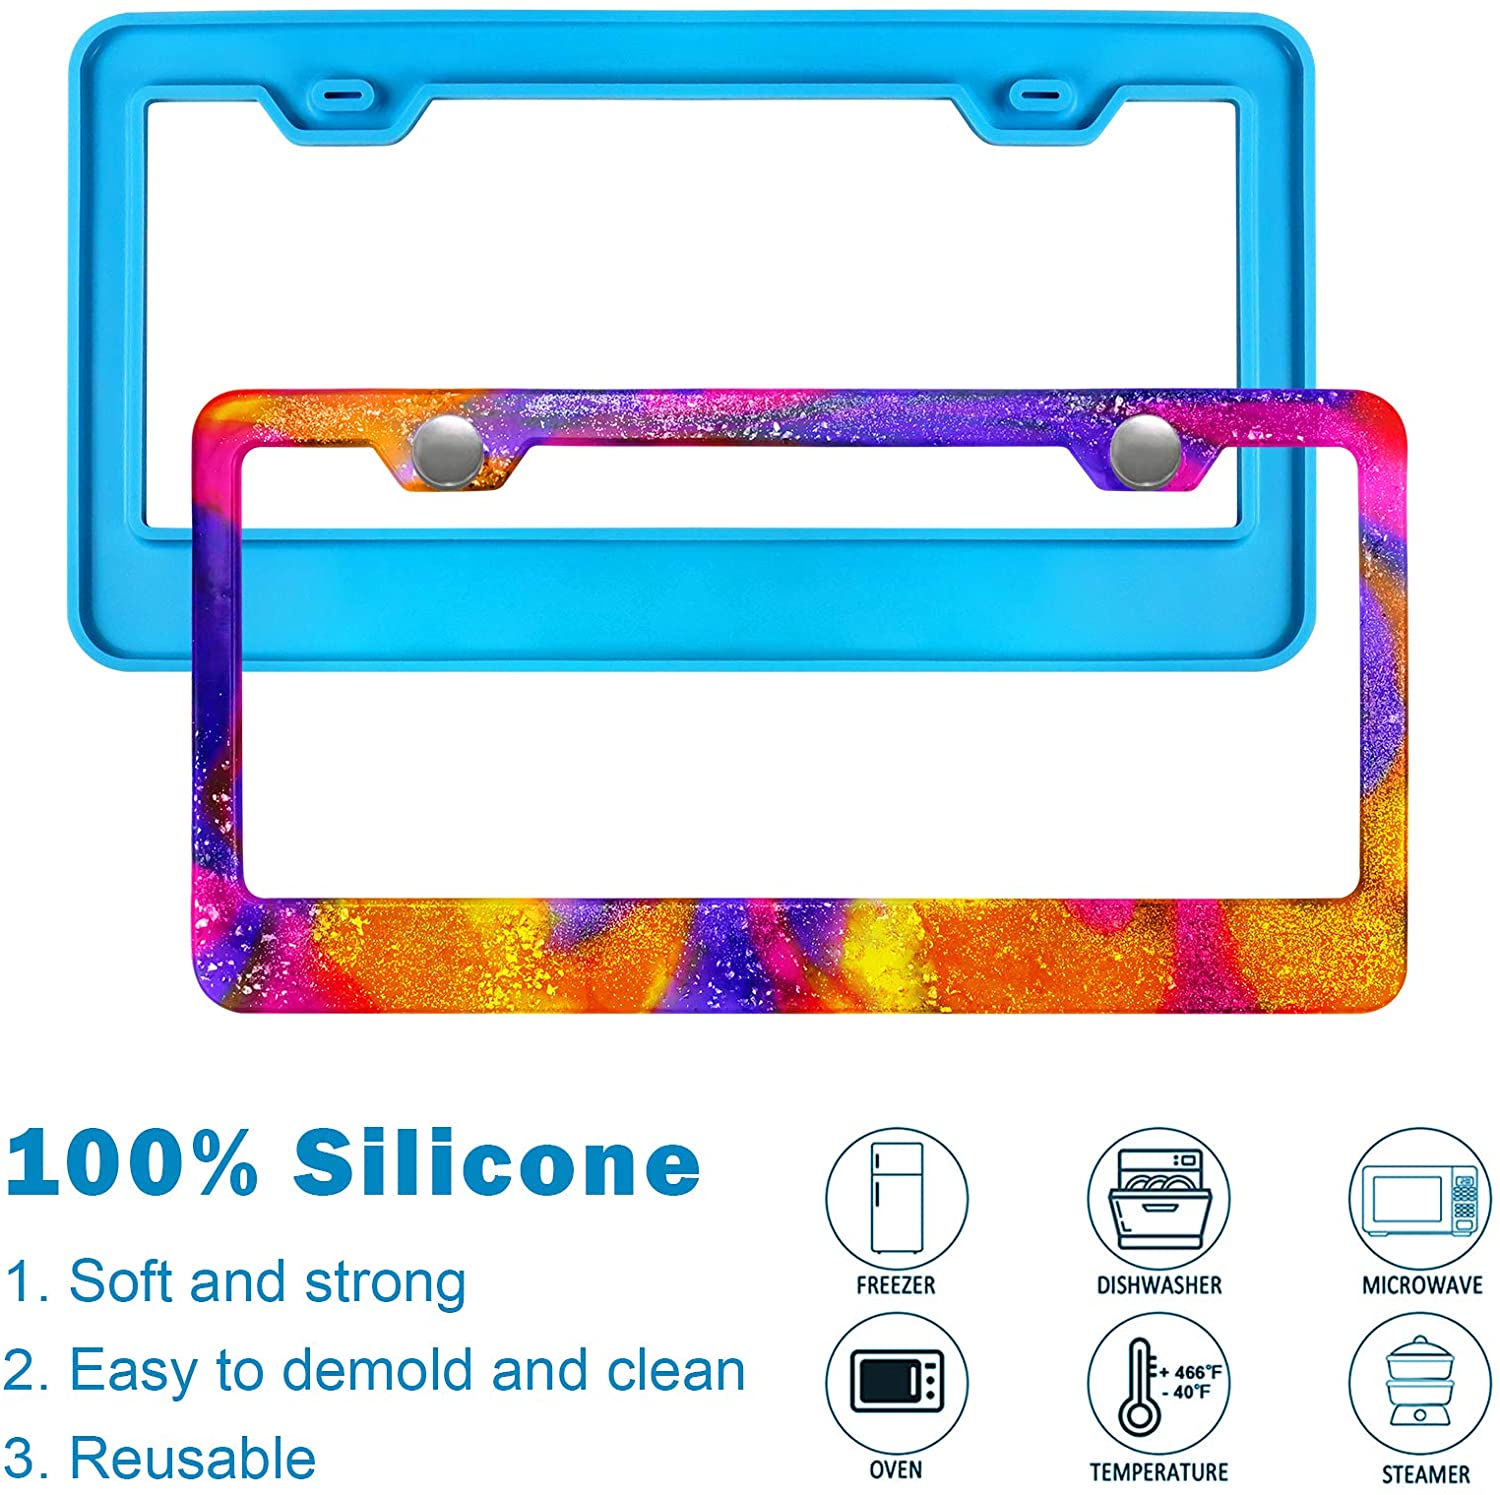 HIYRCH STORE 2pcs Car Decoration Handmade Blue Reusable Car Motorcycle License Plate Frame Resin Mold Epoxy Silicone Mold Frame